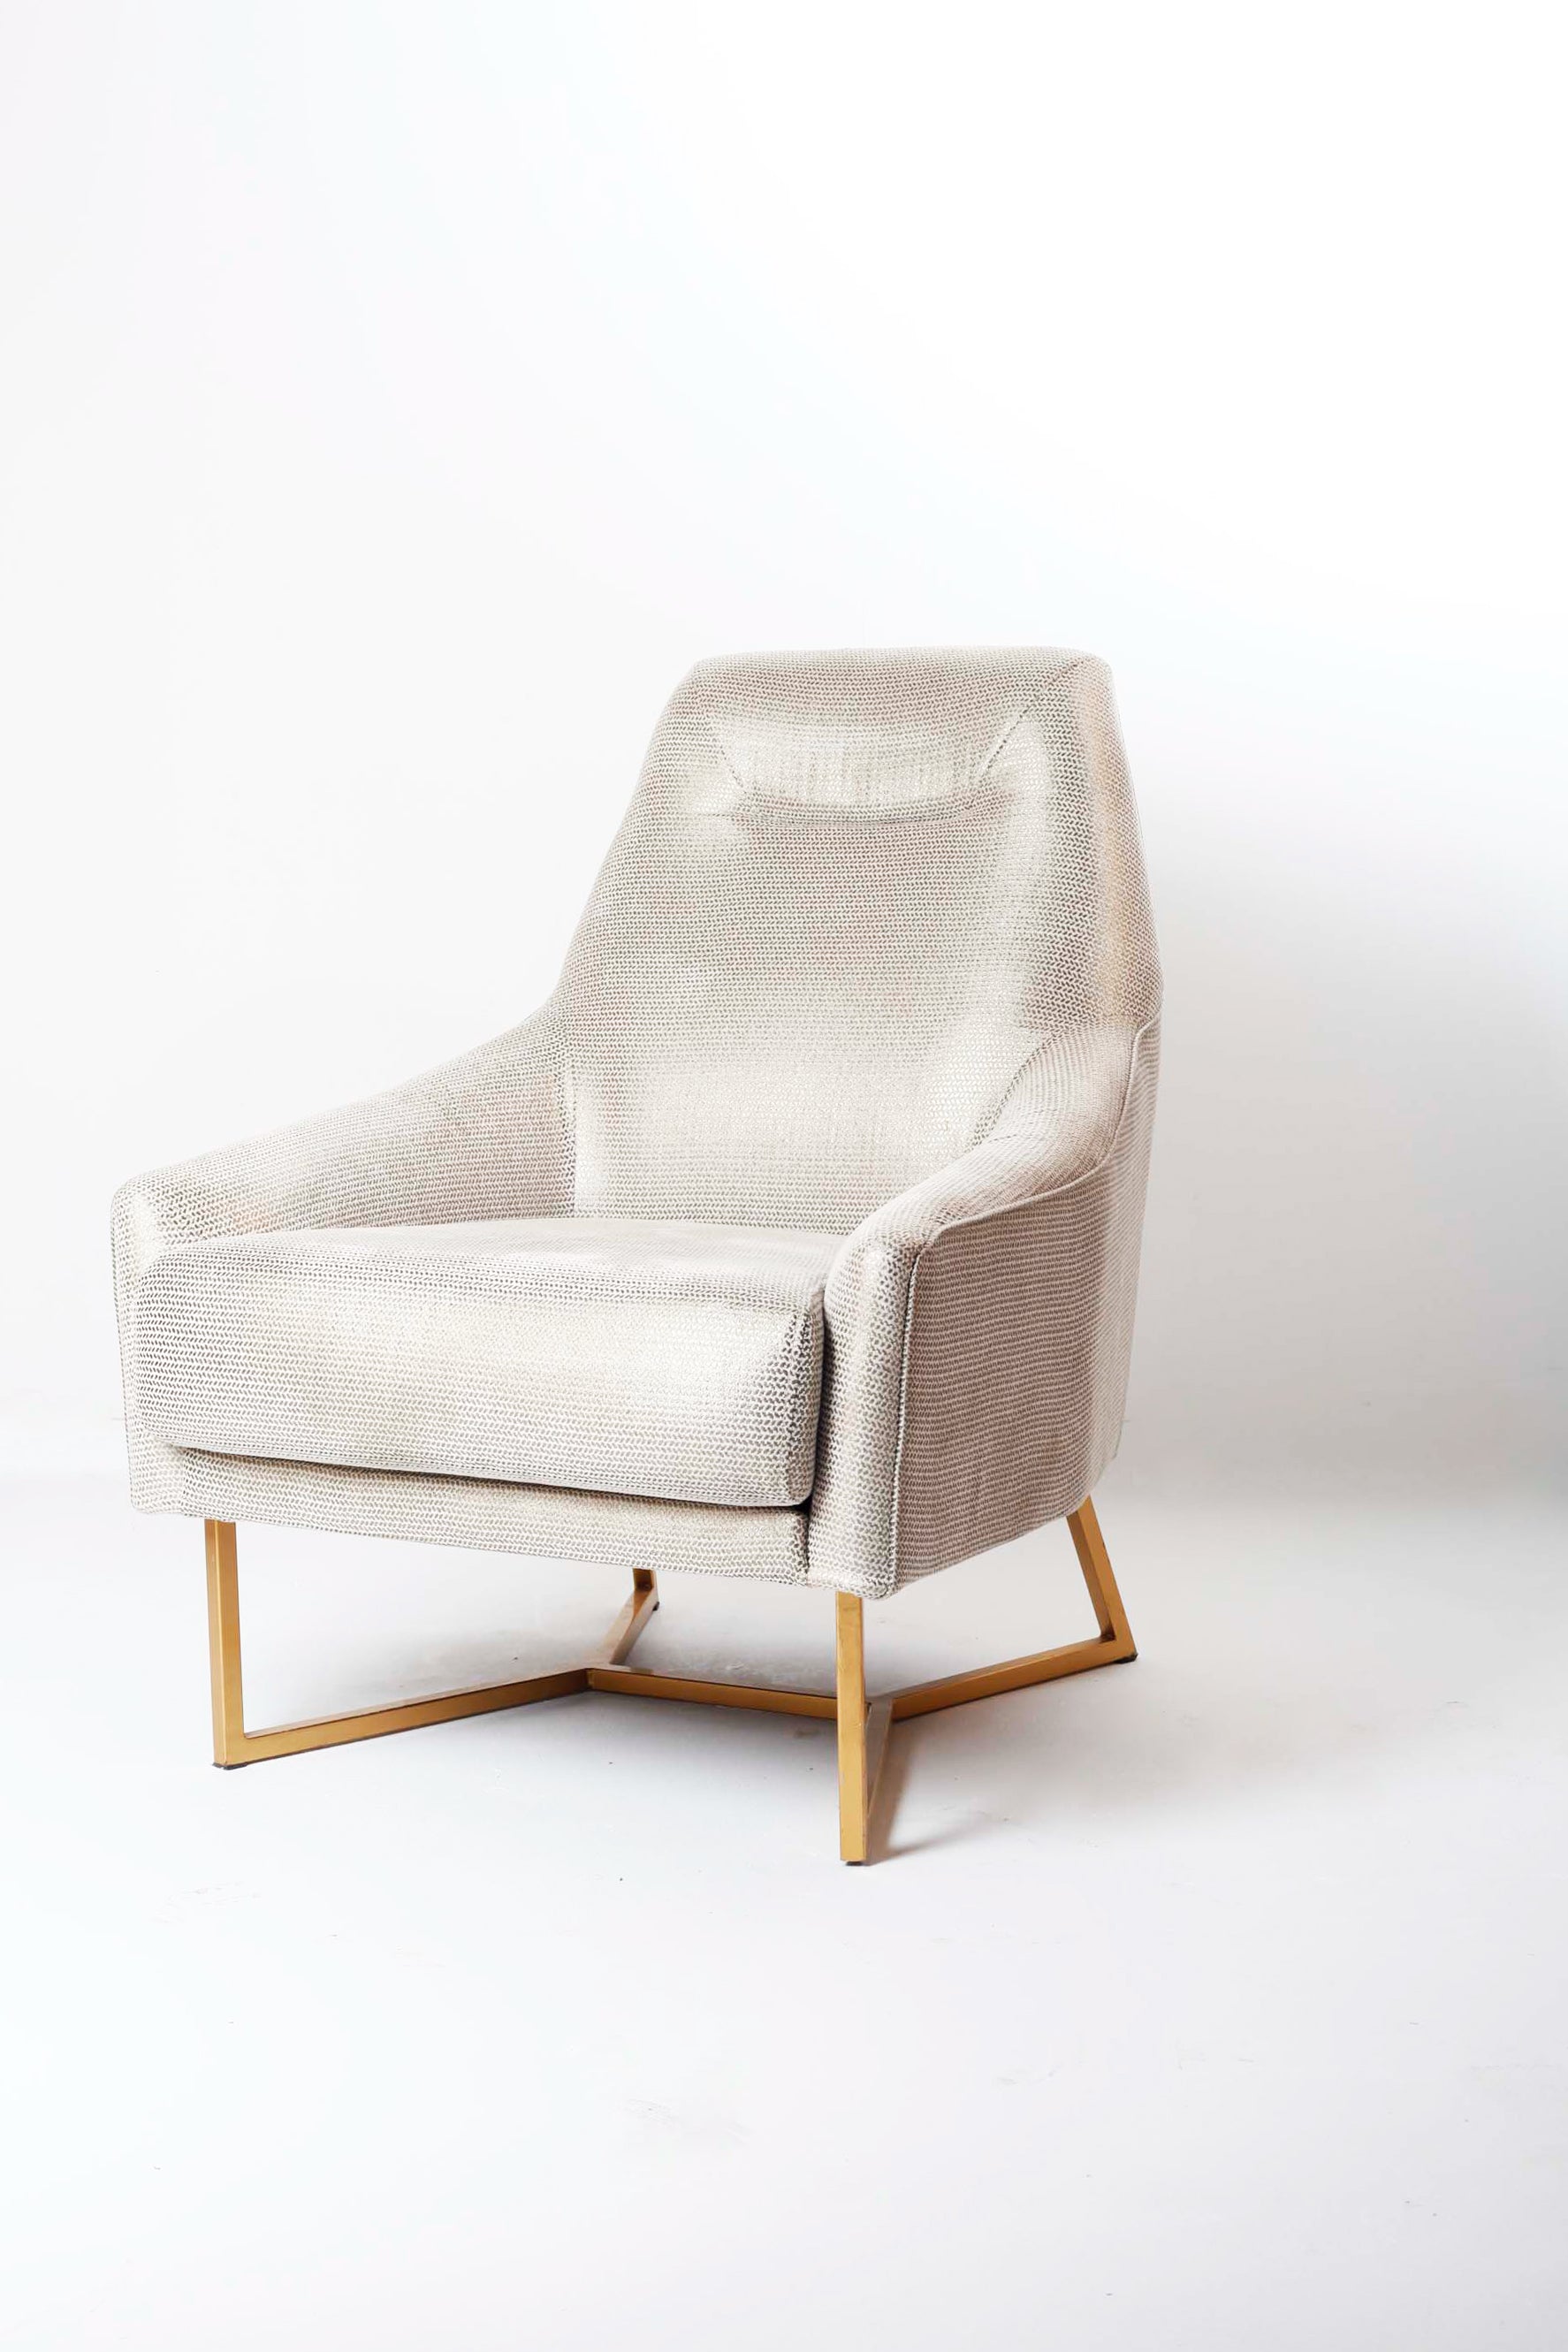 GREY ARMCHAIR WITH GOLD SPECKLES & LEGS (2 pieces available)